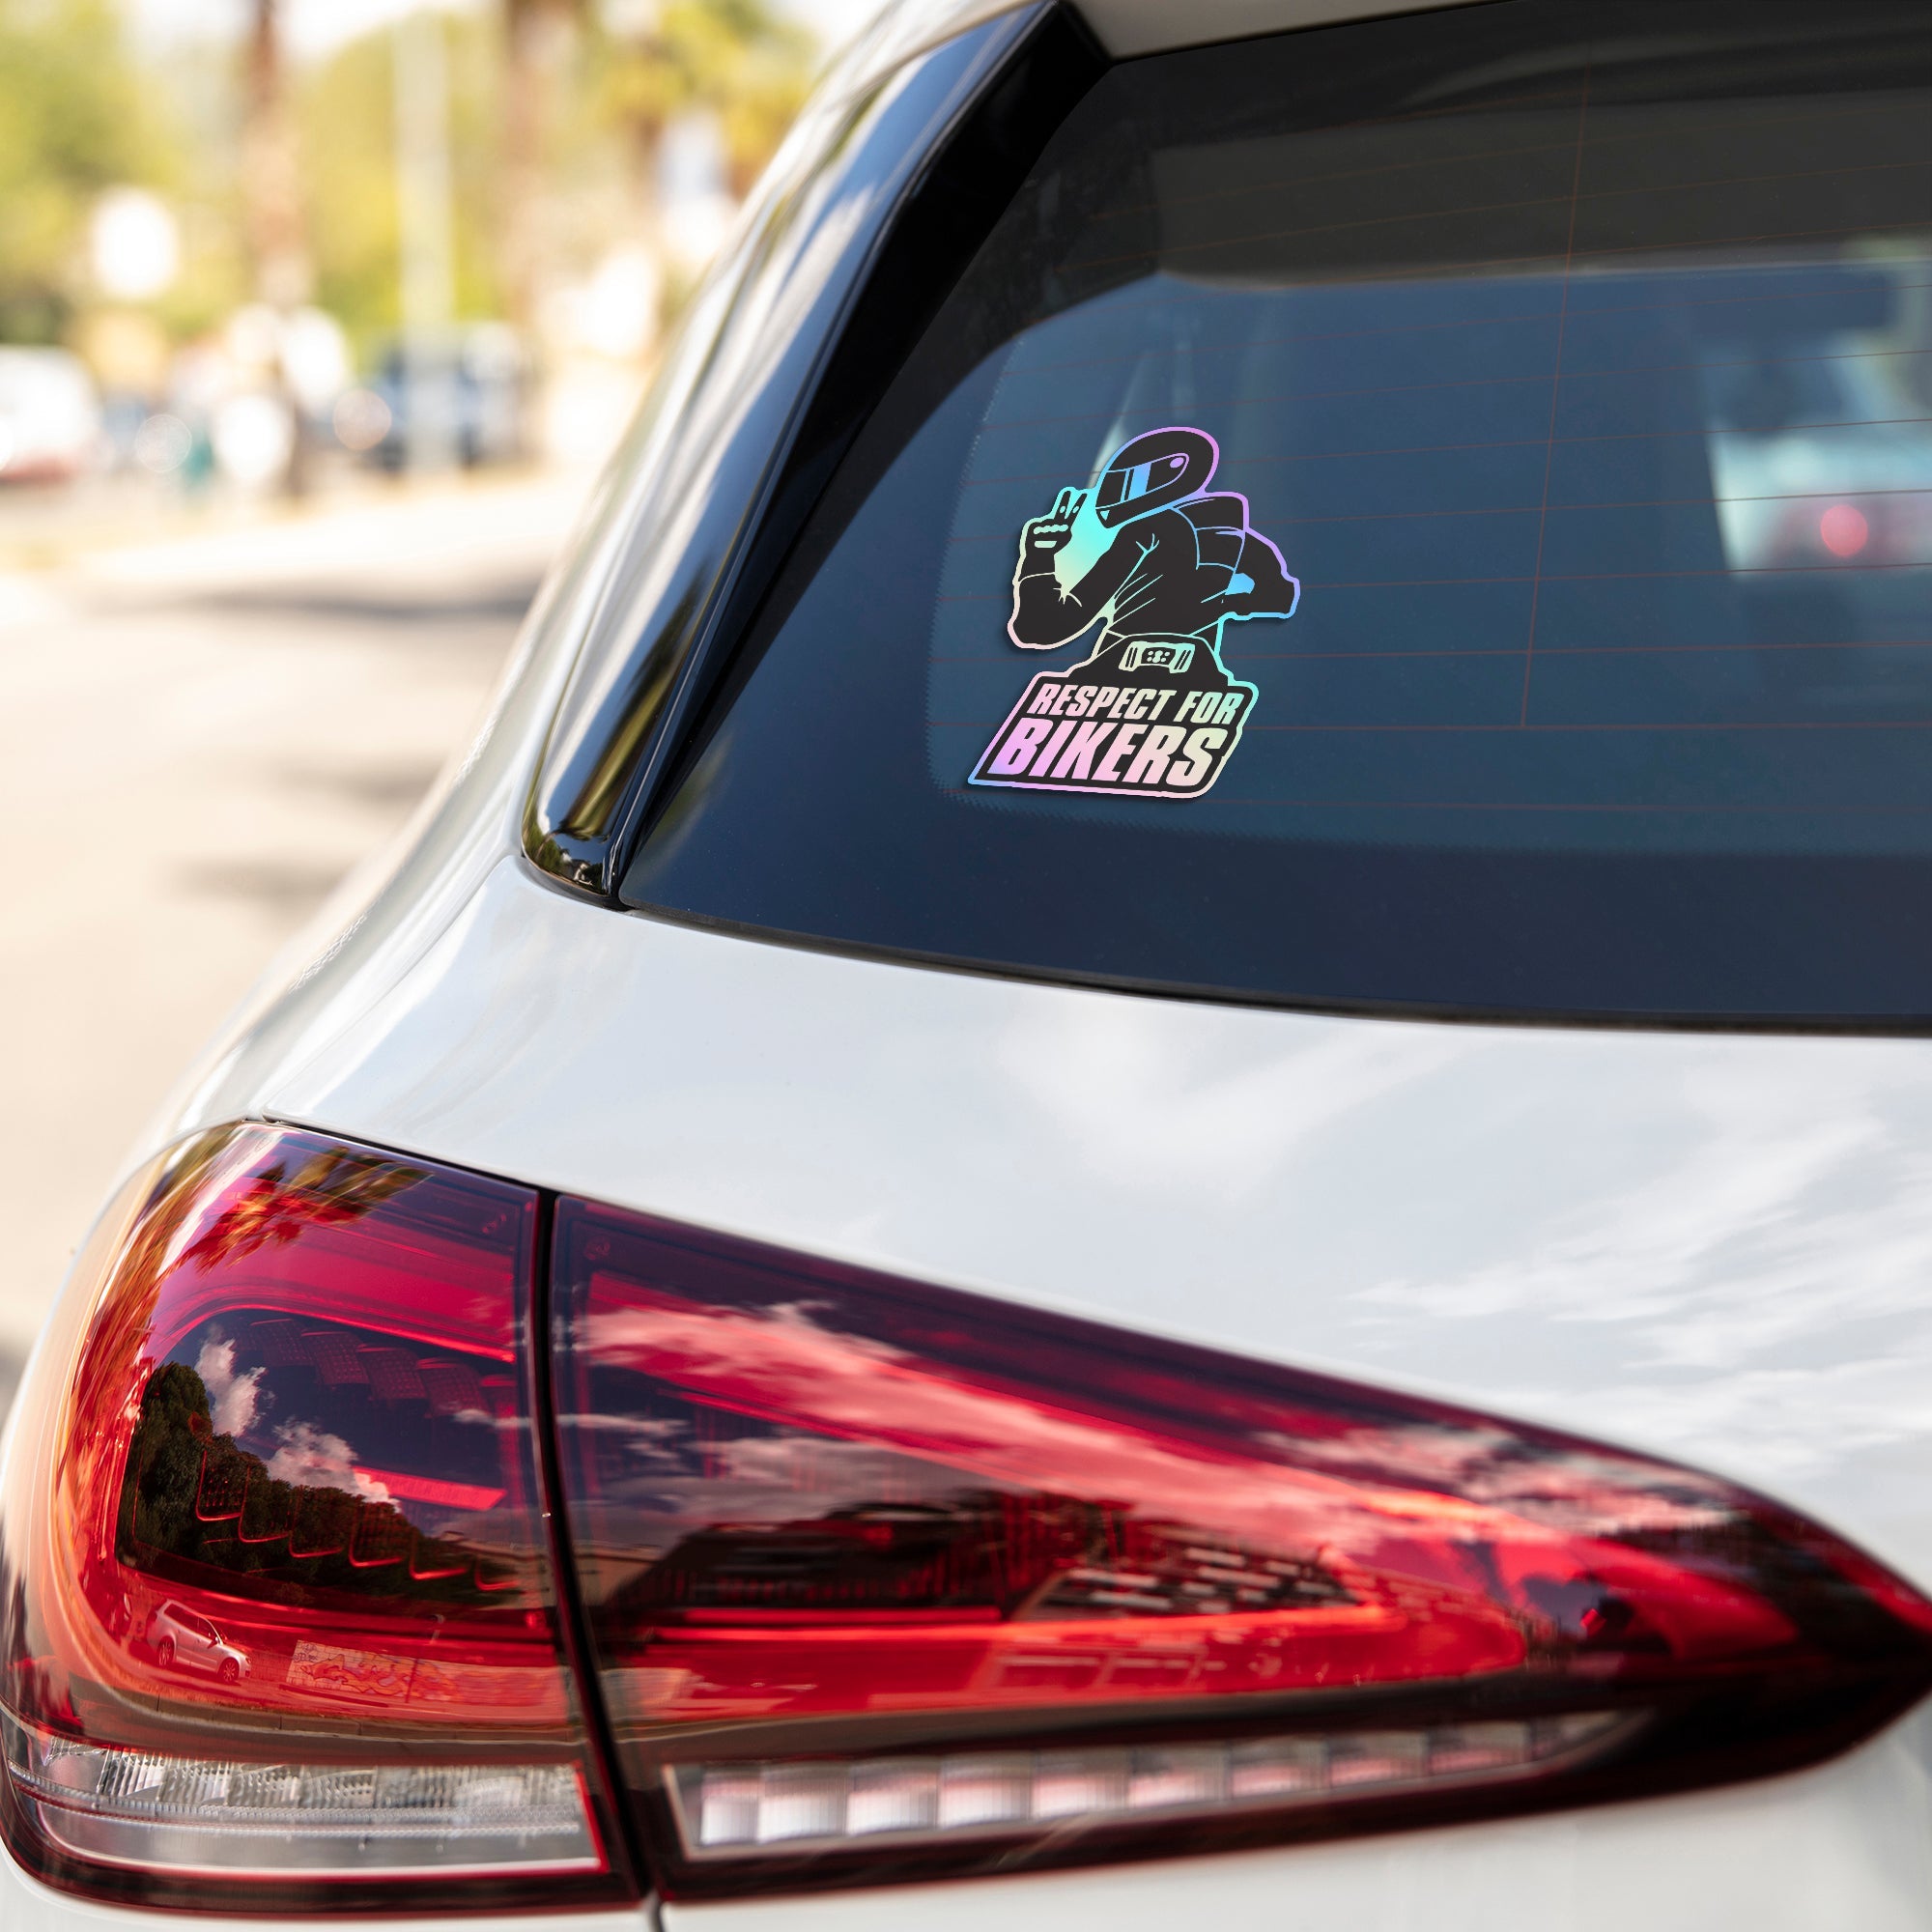 Respect for Bikers Holographic Stickers